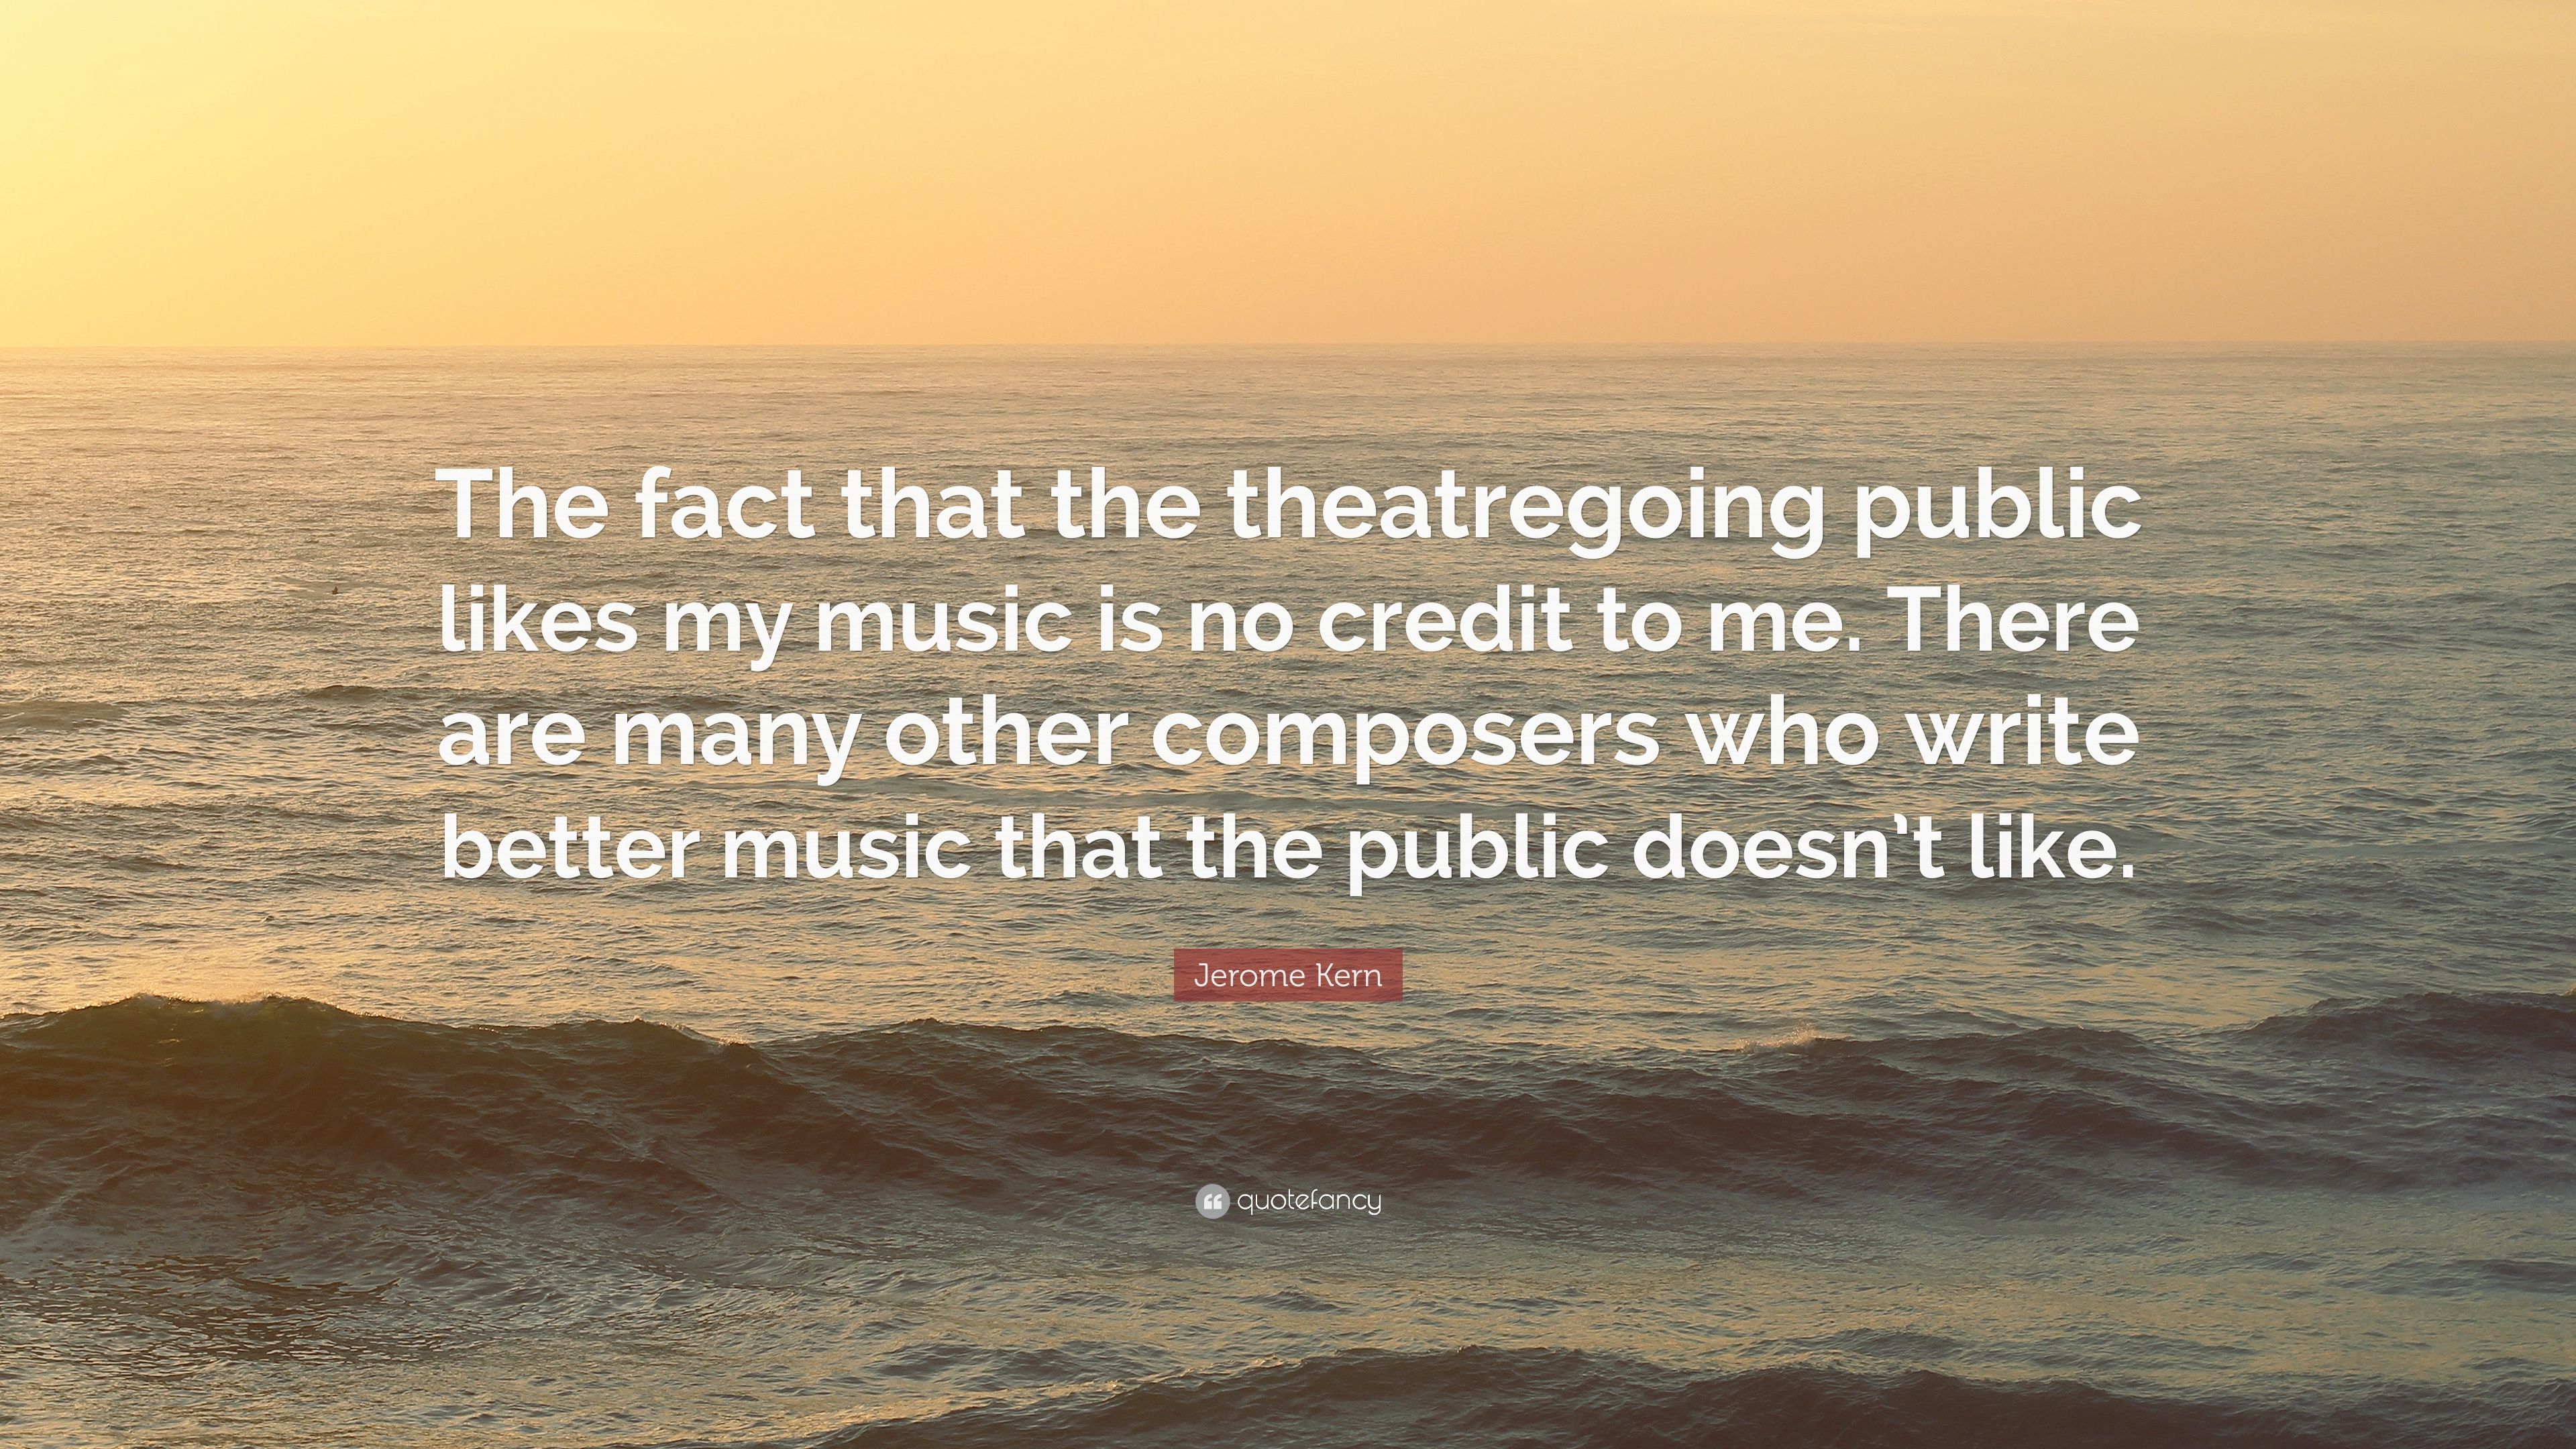 Jerome kern quote âthe fact that the theatregoing public likes my music is no credit to me there are many other posers who write betterâ